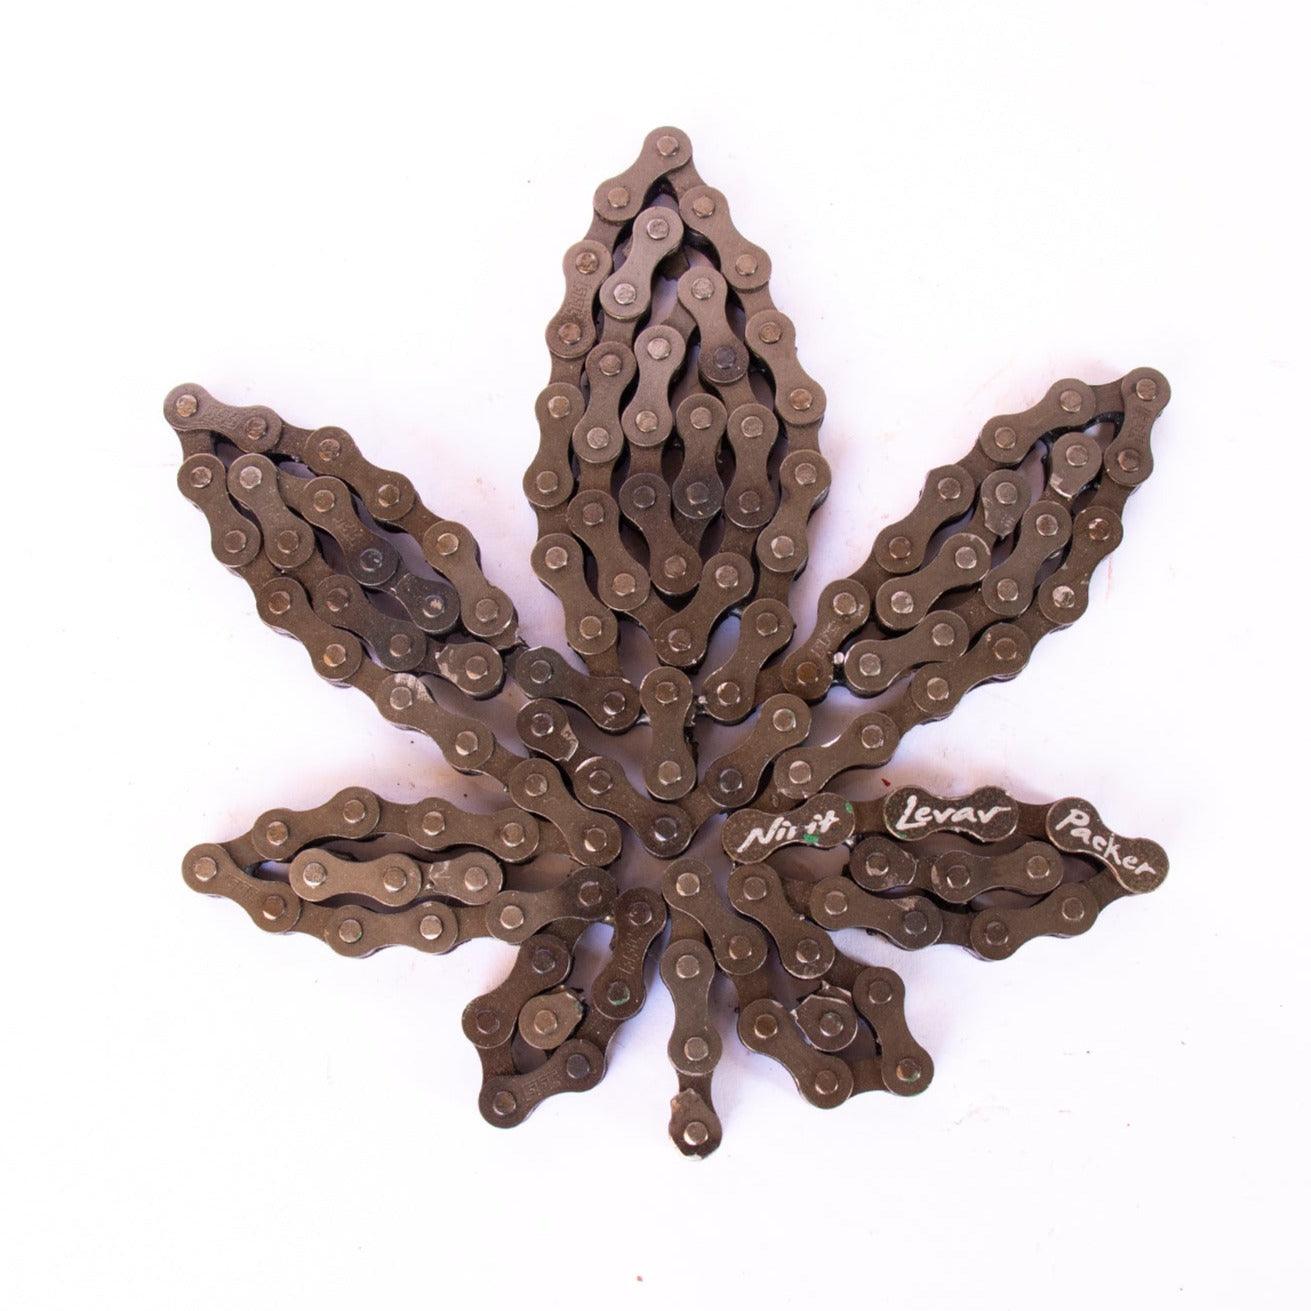 Cannabis Leaf Sculpture | UNCHAINED by NIRIT LEVAV PACKER